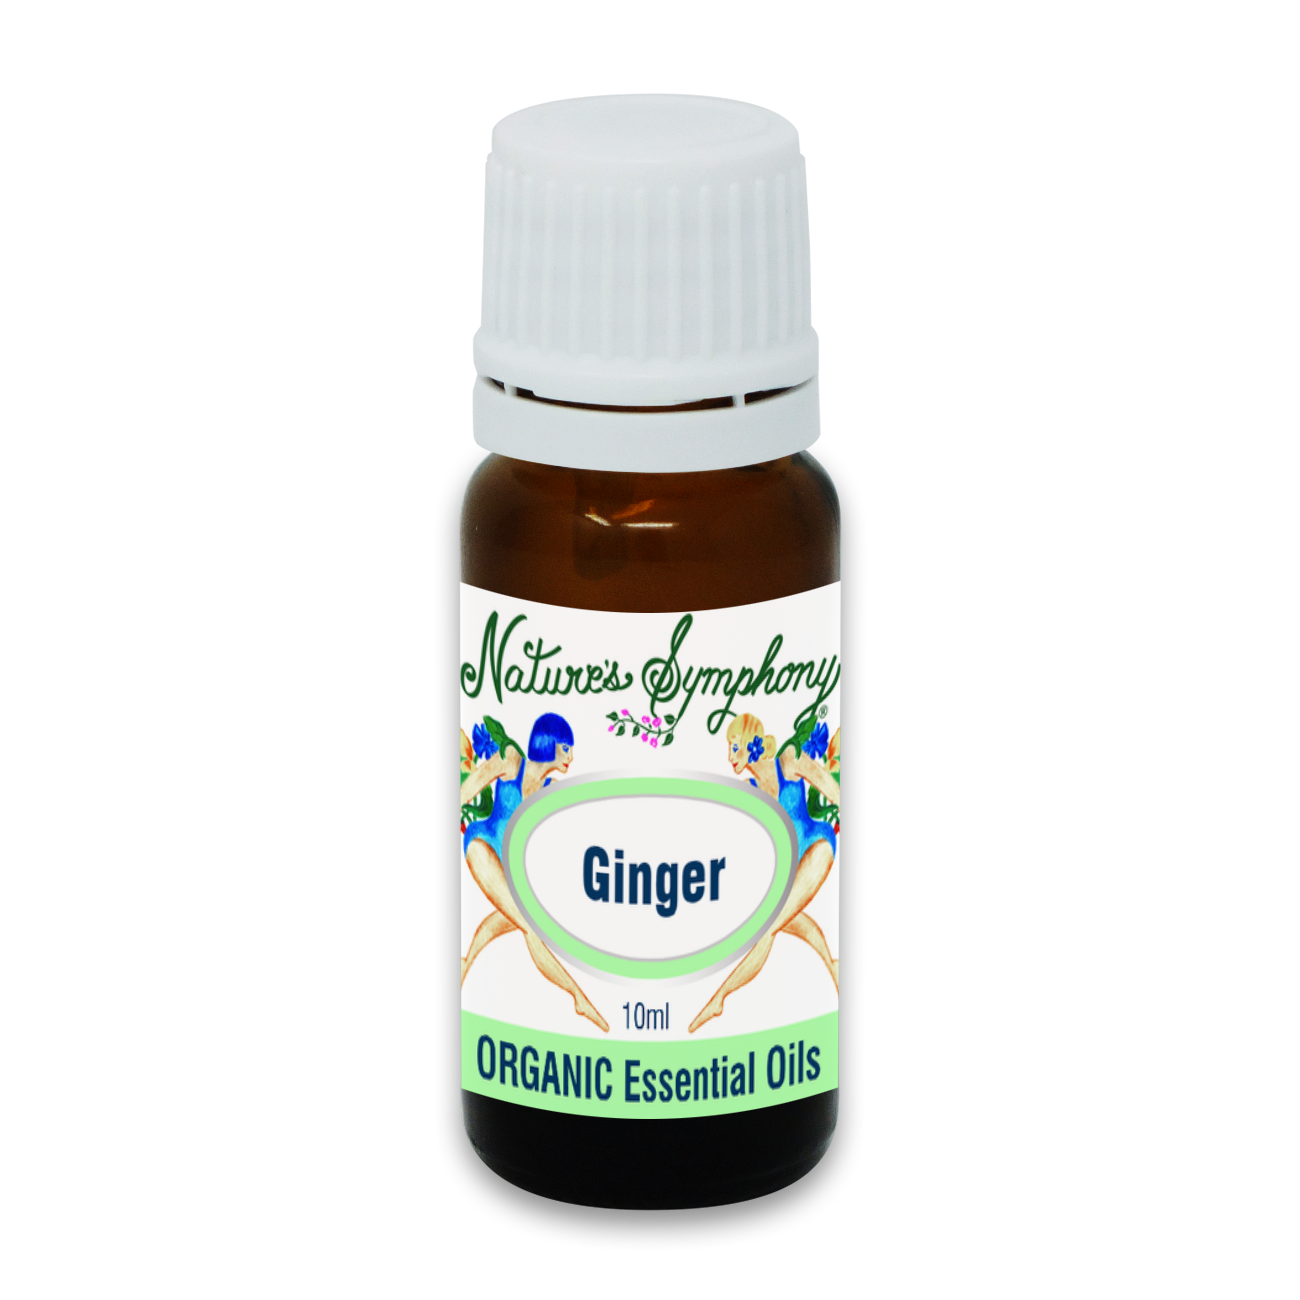 Ginger, Organic/Wildcrafted oil - 10ml